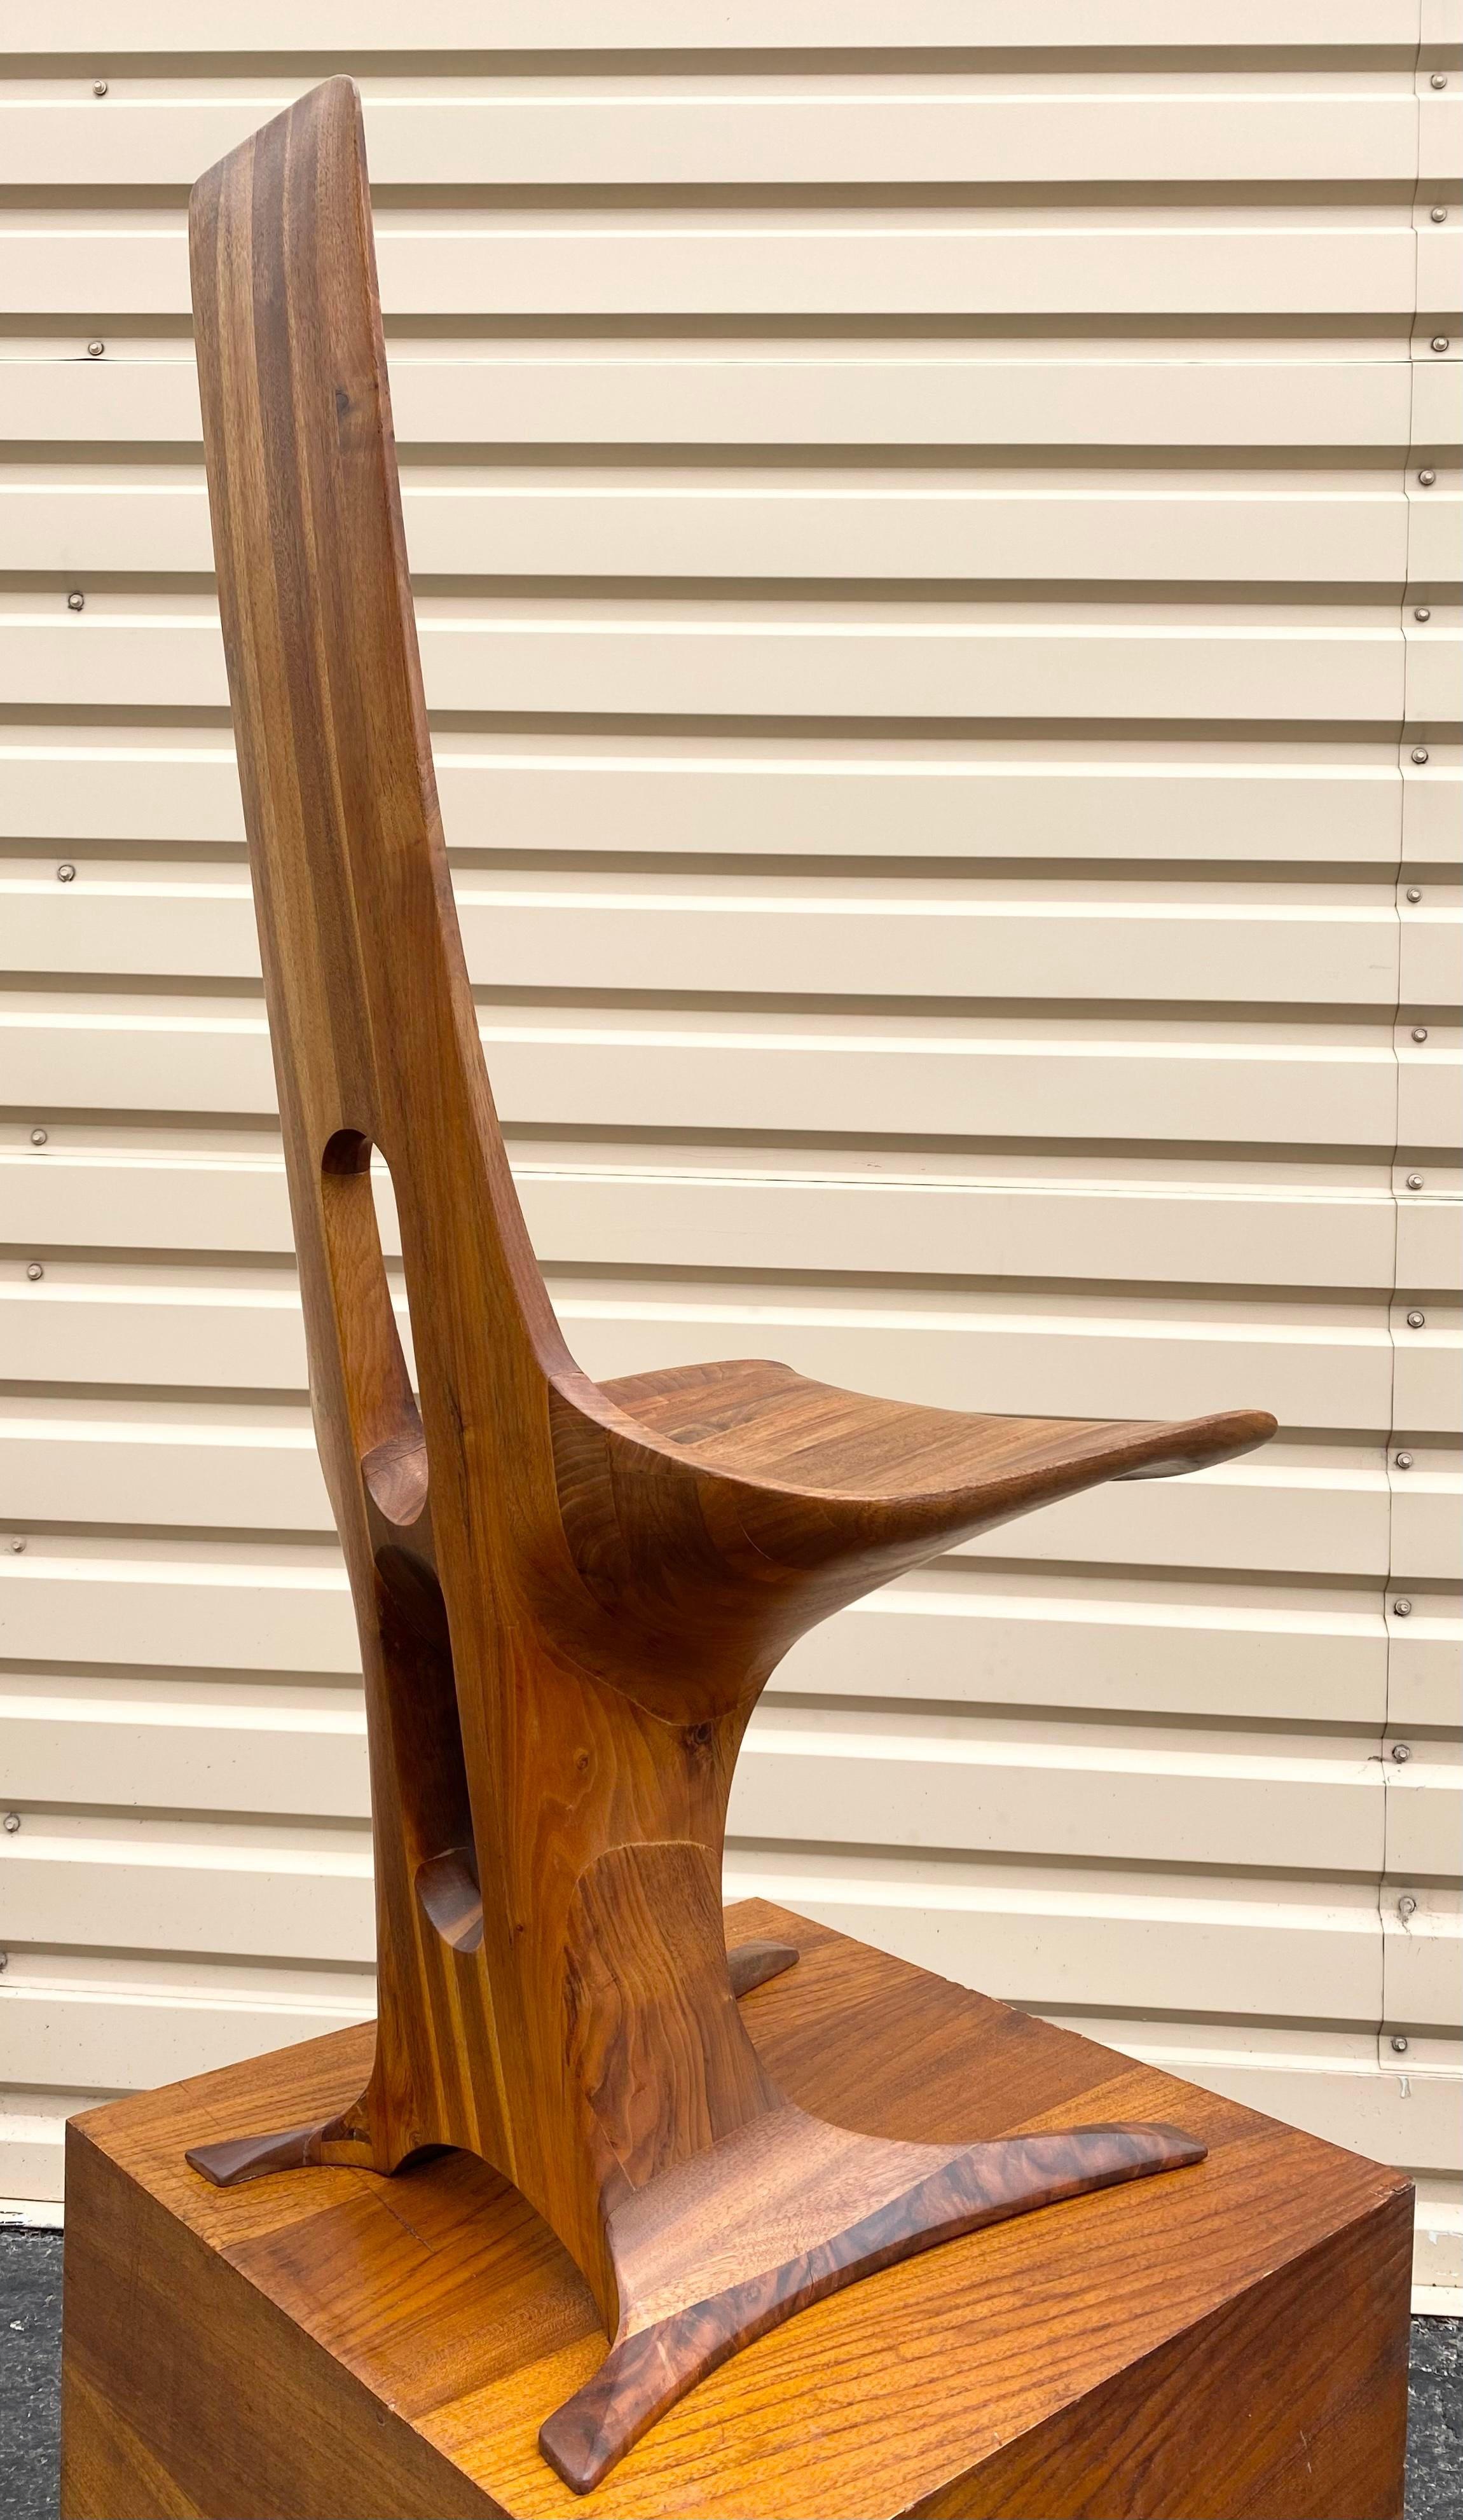 Modernist Sculptural Walnut Chair by Edward G. Livingston for Archotypo (1970) For Sale 5